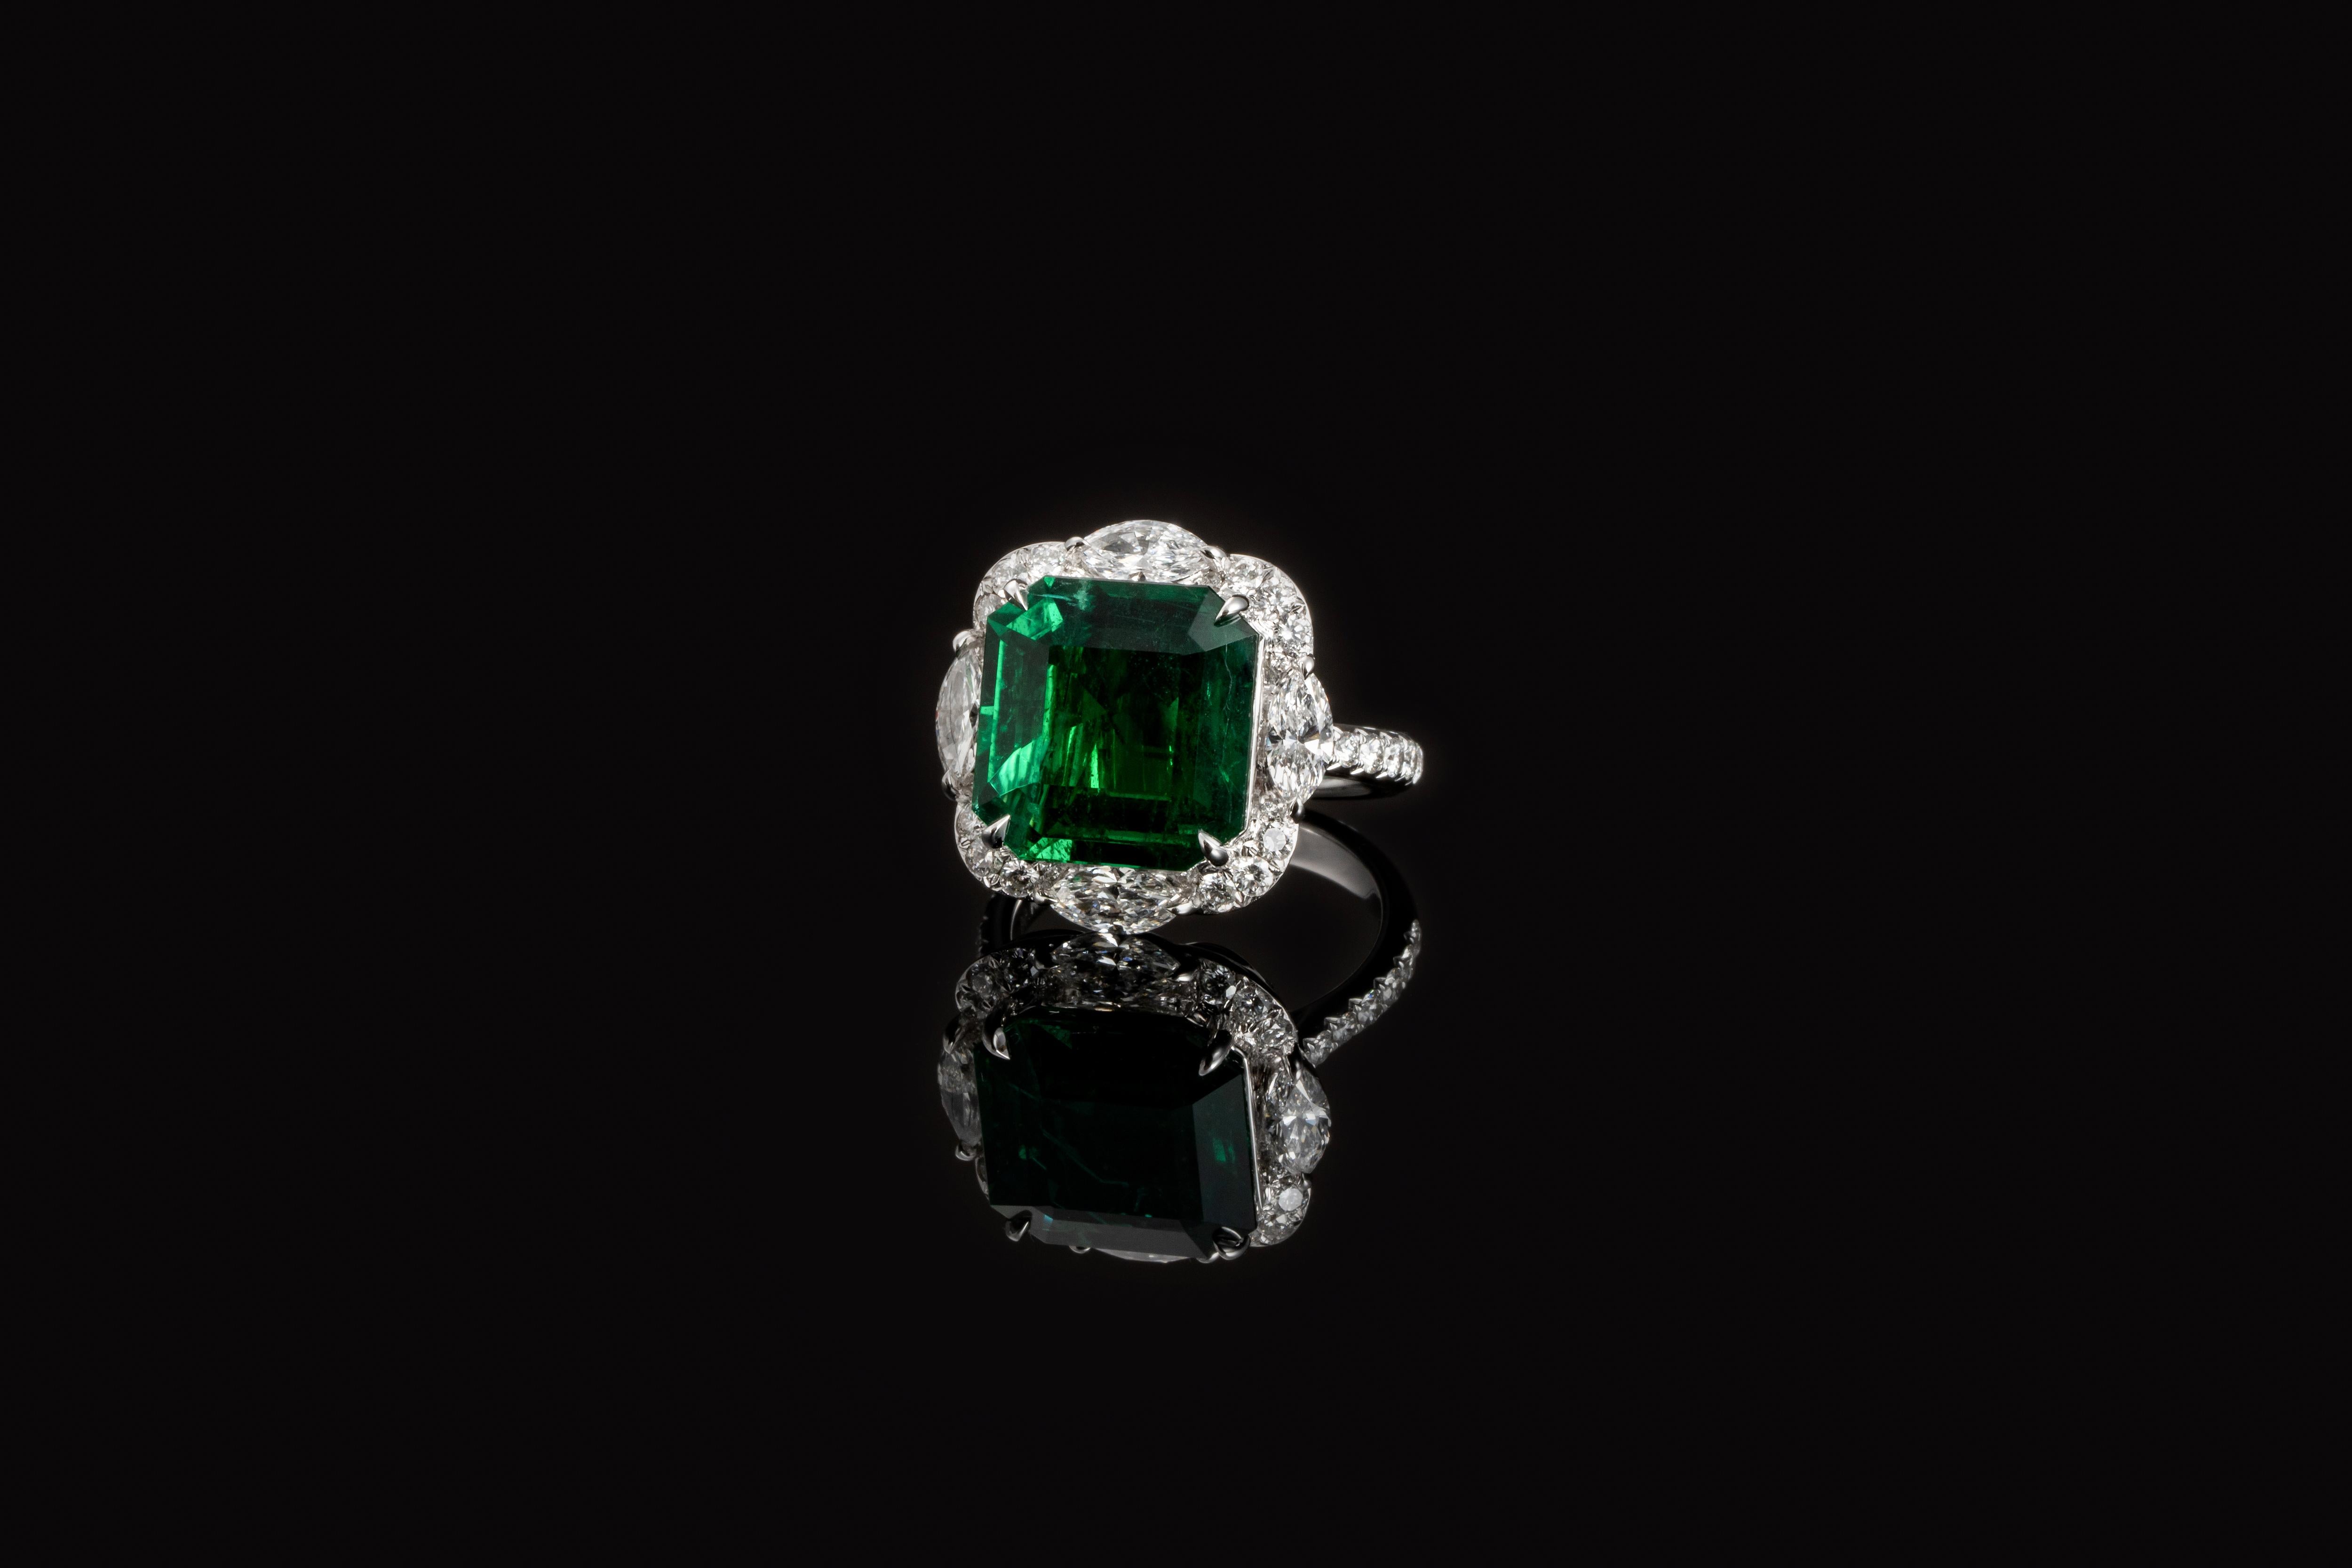 Octagonal Zambia Emerald 7.59ct in the centre, 
GRS certified as Vivid Green with minor quality,
Mounting with all Marquise diamond
Size:12.97x12.76x6.56mm